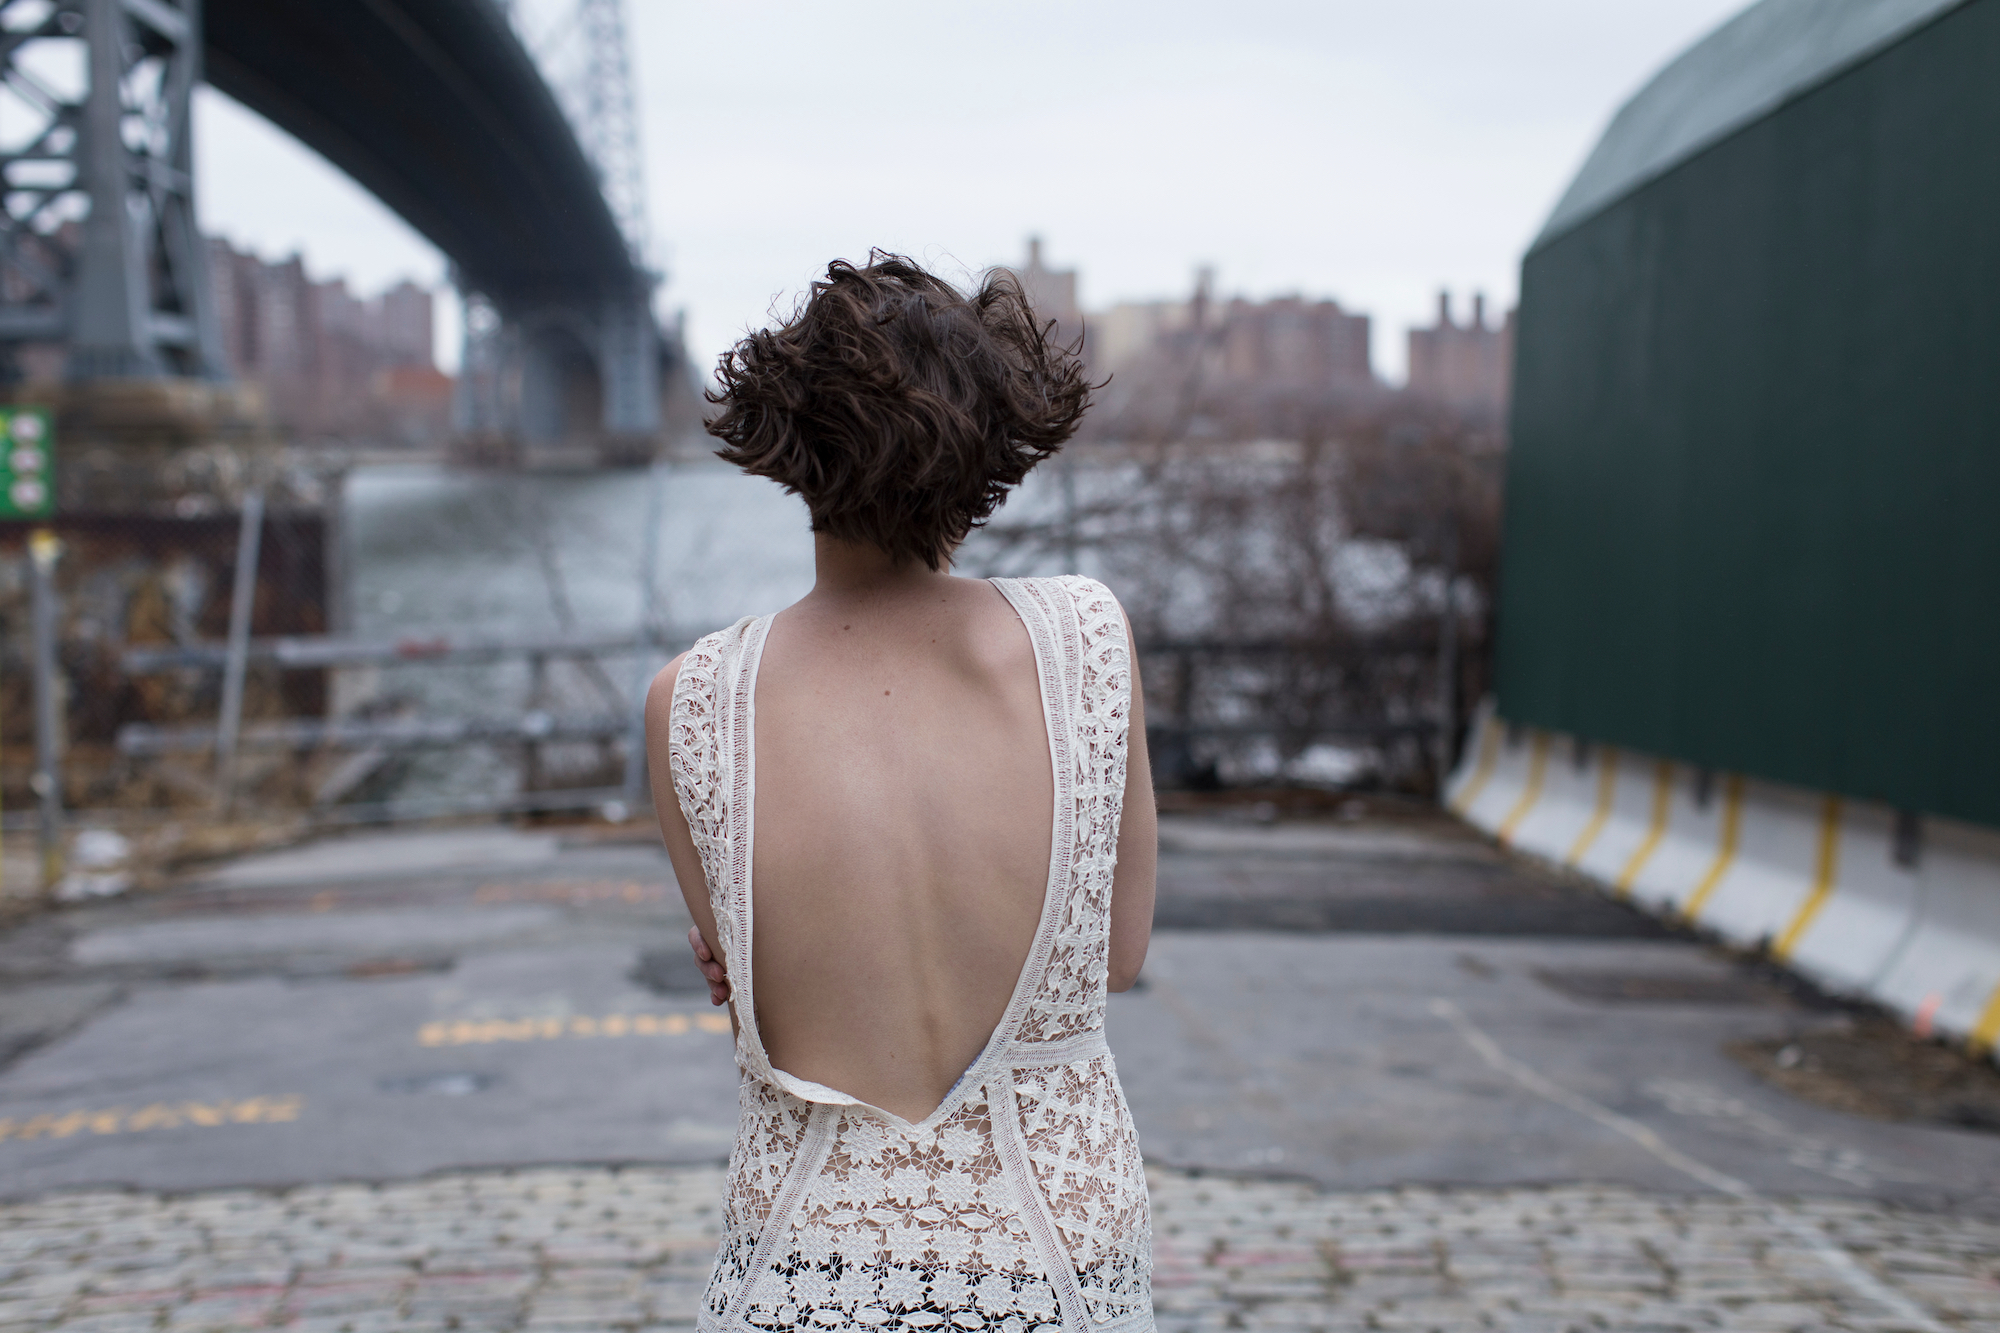 You Can Actually Adjust How Much Cleavage You Show With This Backless Bra